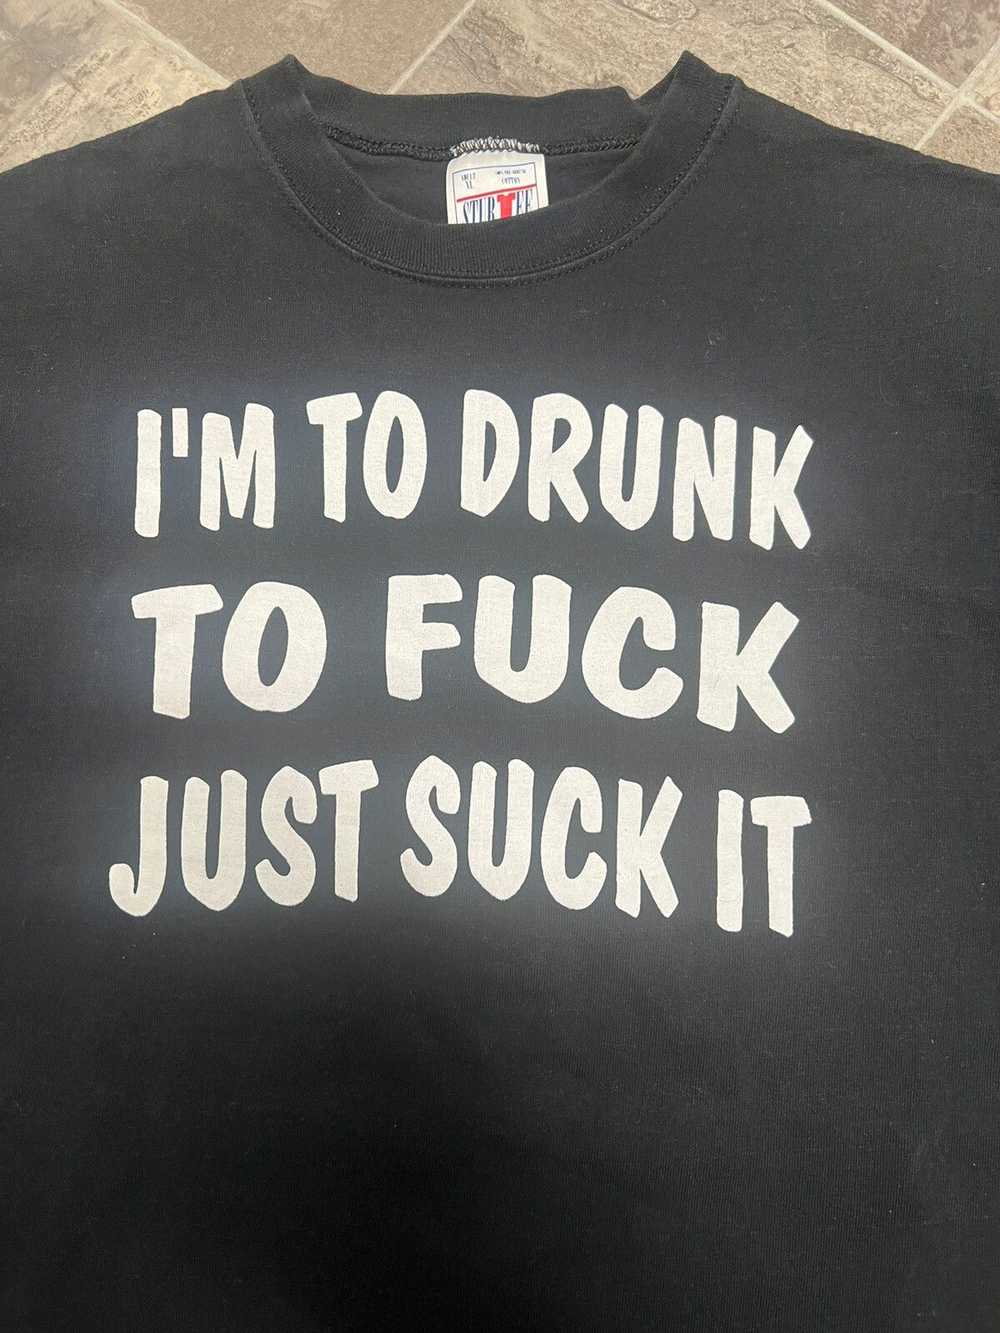 Made In Usa × Other × Vintage “I’M TO DRUNK TO FU… - image 3